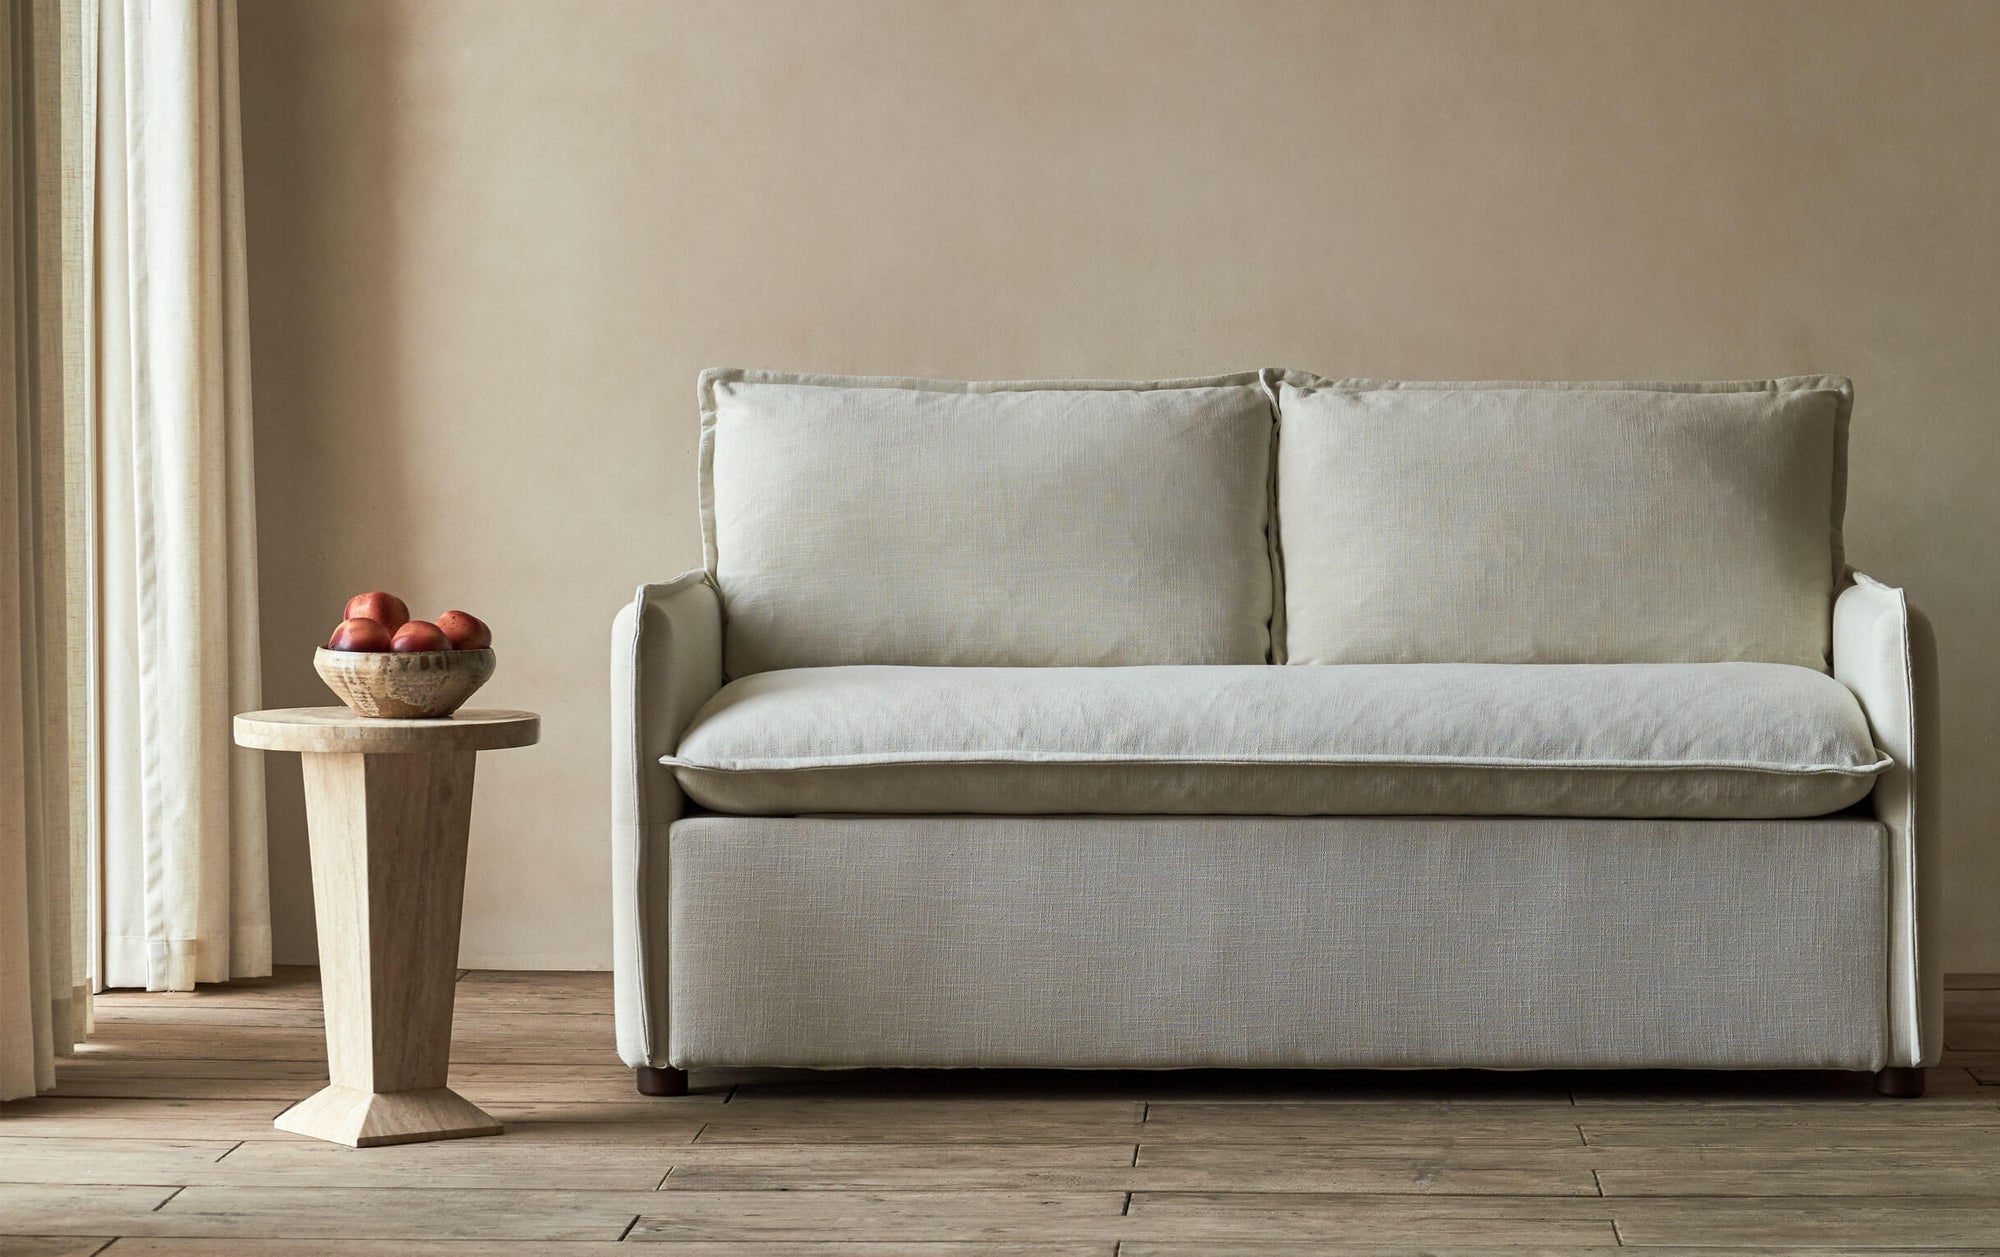 Neva Sleeper Sofa in Young Coconut, a powdery white Recycled Poly Linen, placed in a sunny room next to a stone side table holding a bowl of apples